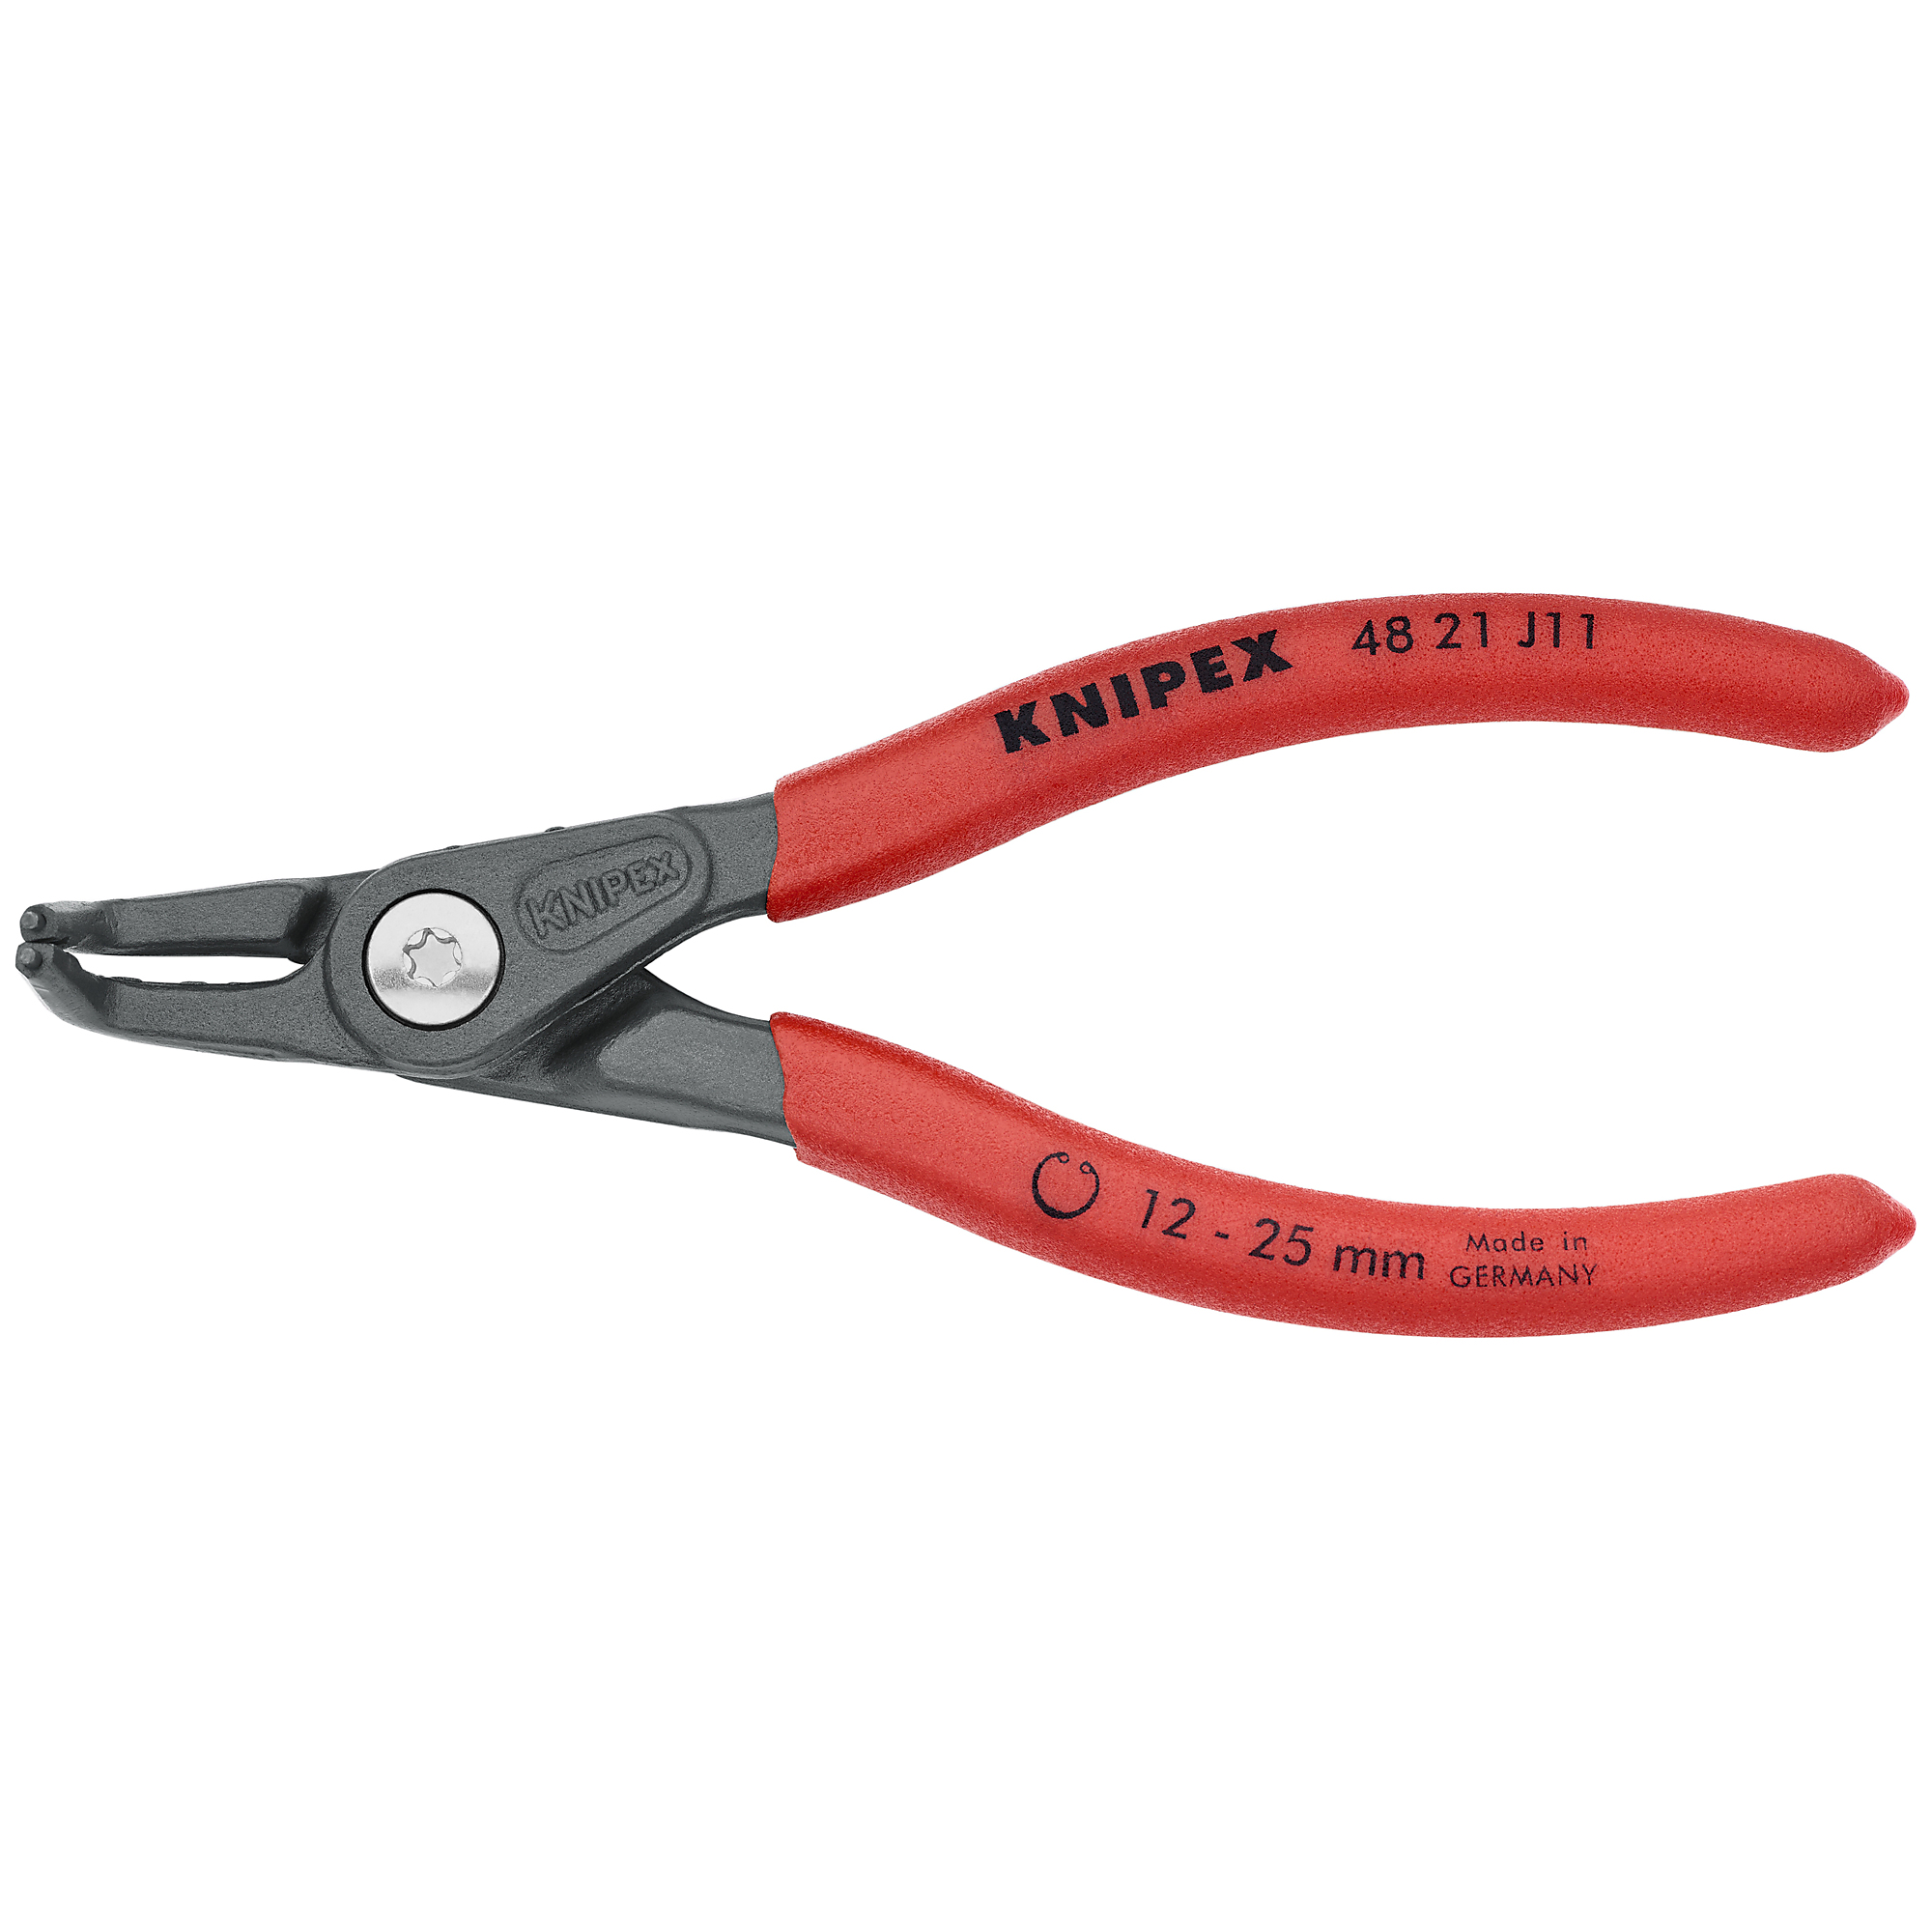 KNIPEX, Int 90Â° Prec. Snap Ring Pliers, 3/64 tip, 5.125Inch, Pieces (qty.) 1 Material Steel, Model 48 21 J11